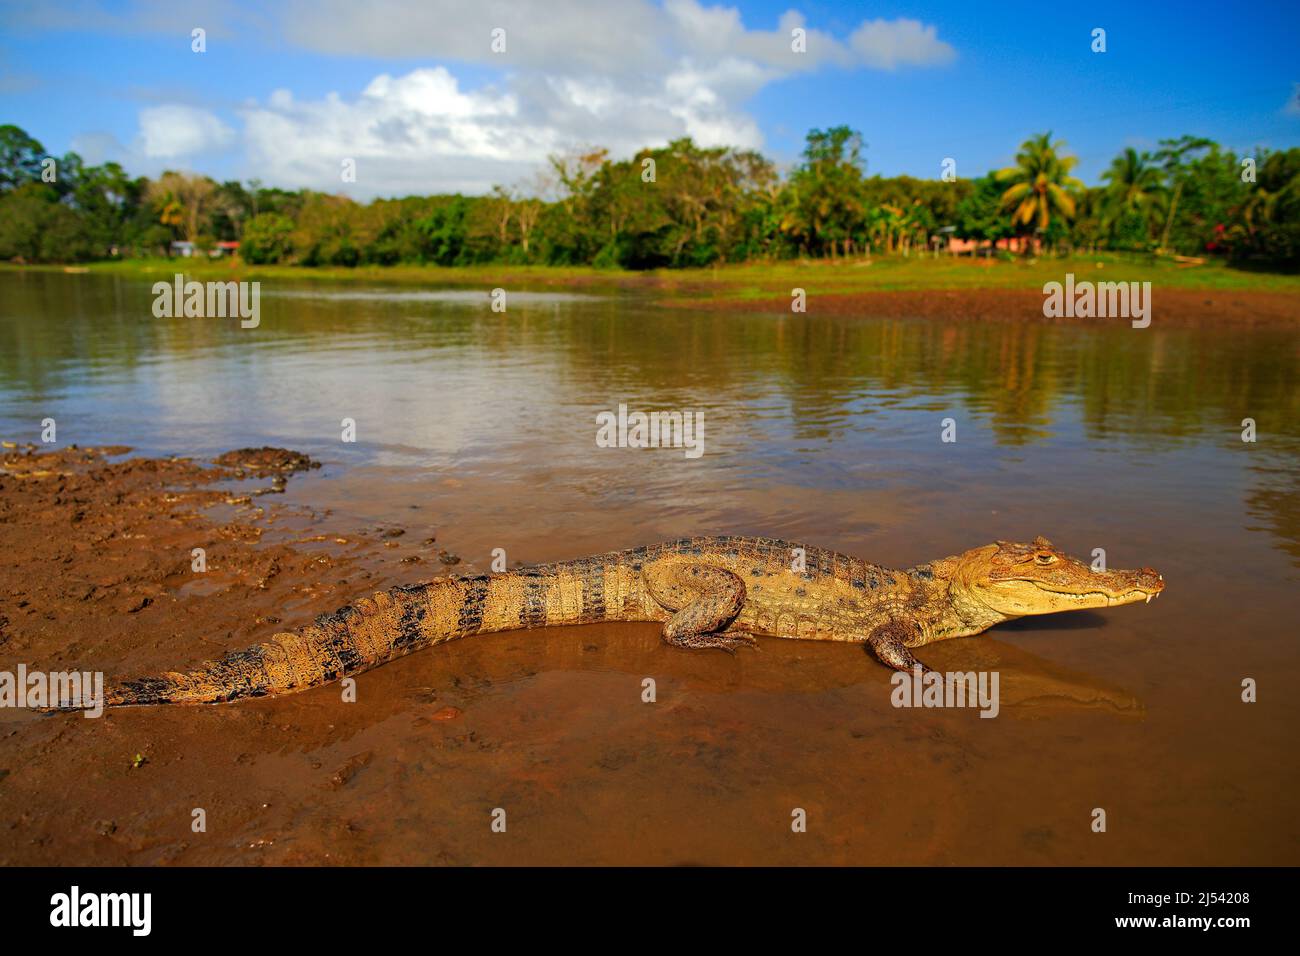 Crocodile in the river water. Spectacled Caimani, Caiman crocodilus, the water with evening sun. Crocodile from Costa Rica. Dangerous water animal in Stock Photo